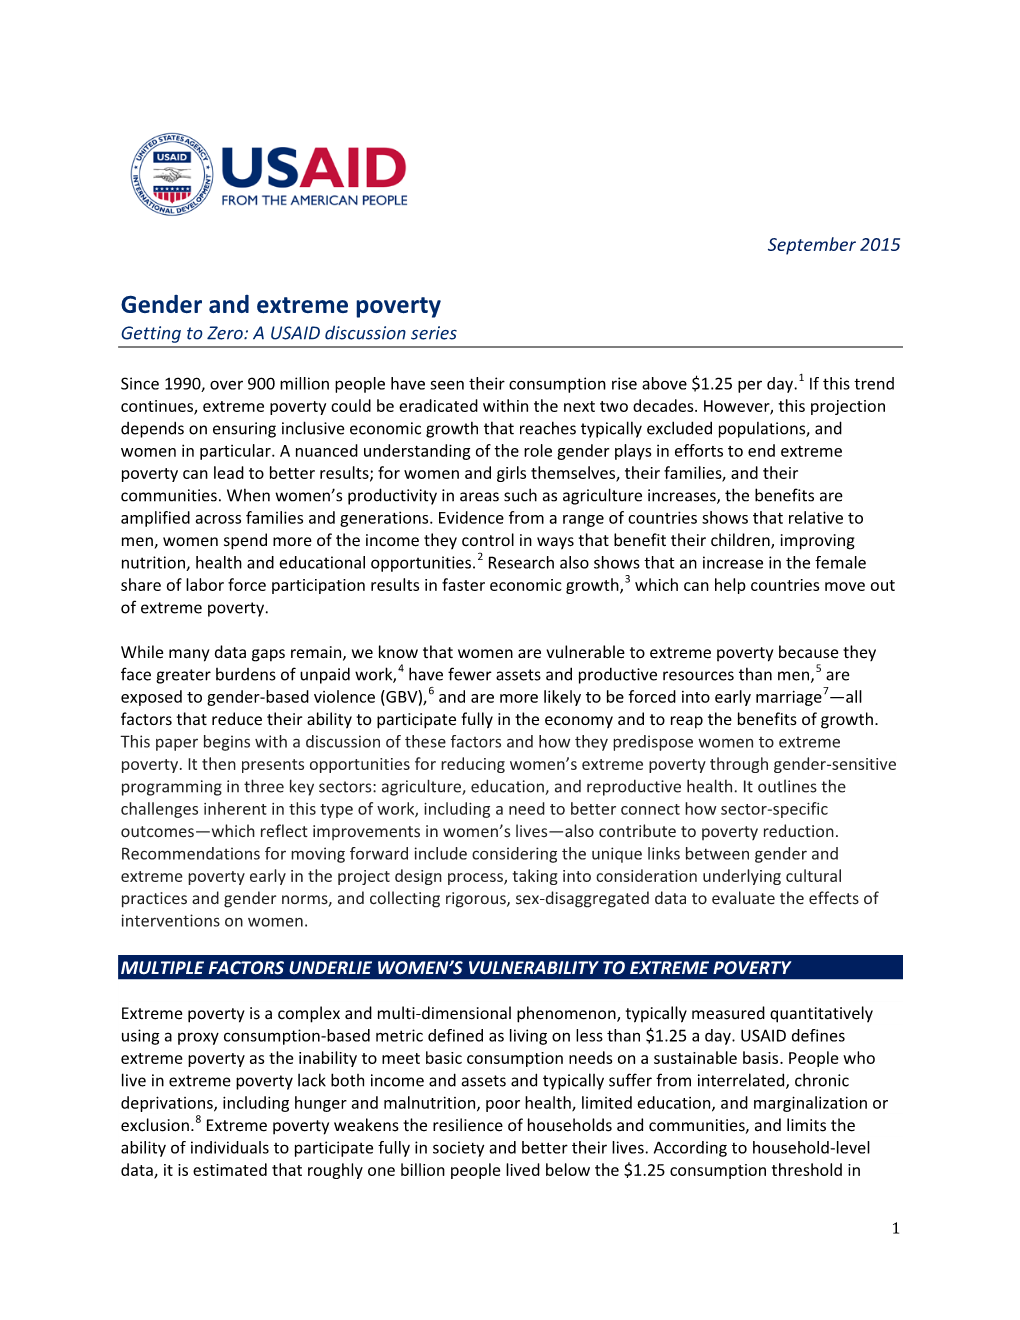 Gender and Extreme Poverty Getting to Zero: a USAID Discussion Series